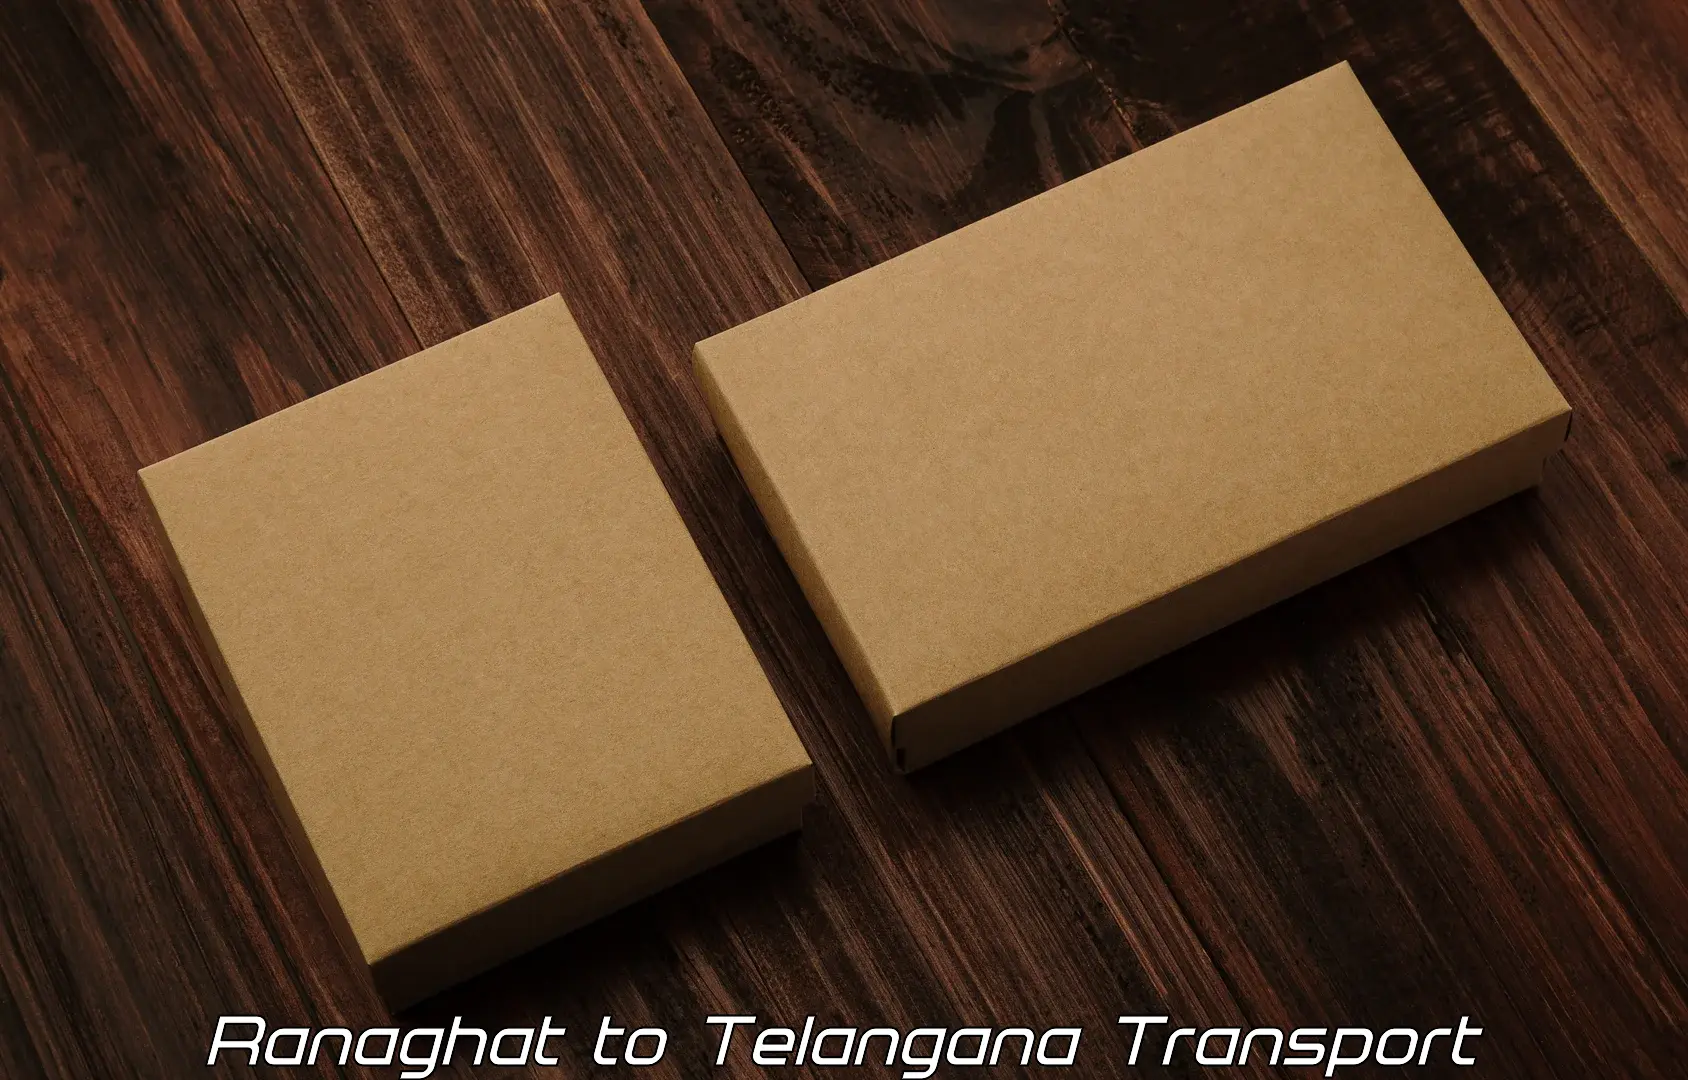 Vehicle transport services in Ranaghat to Sirikonda